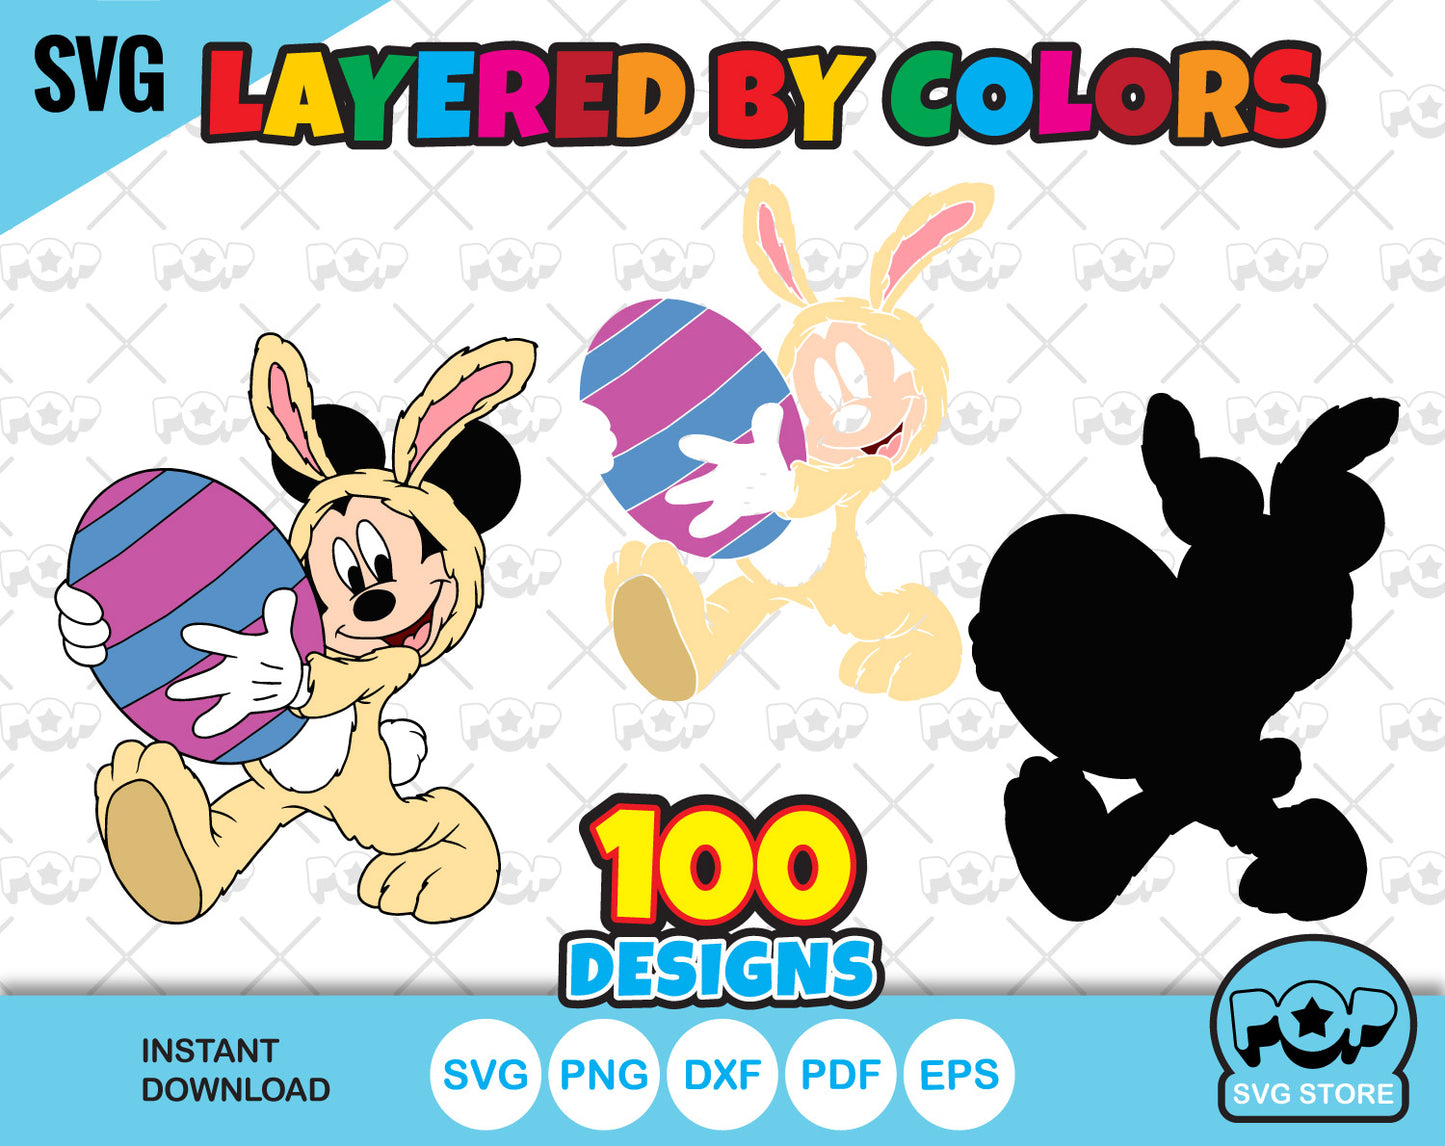 Mickey and Friends Easter clipart bundle, Disney Easter SVG cut files for Cricut / Silhouette, instant download